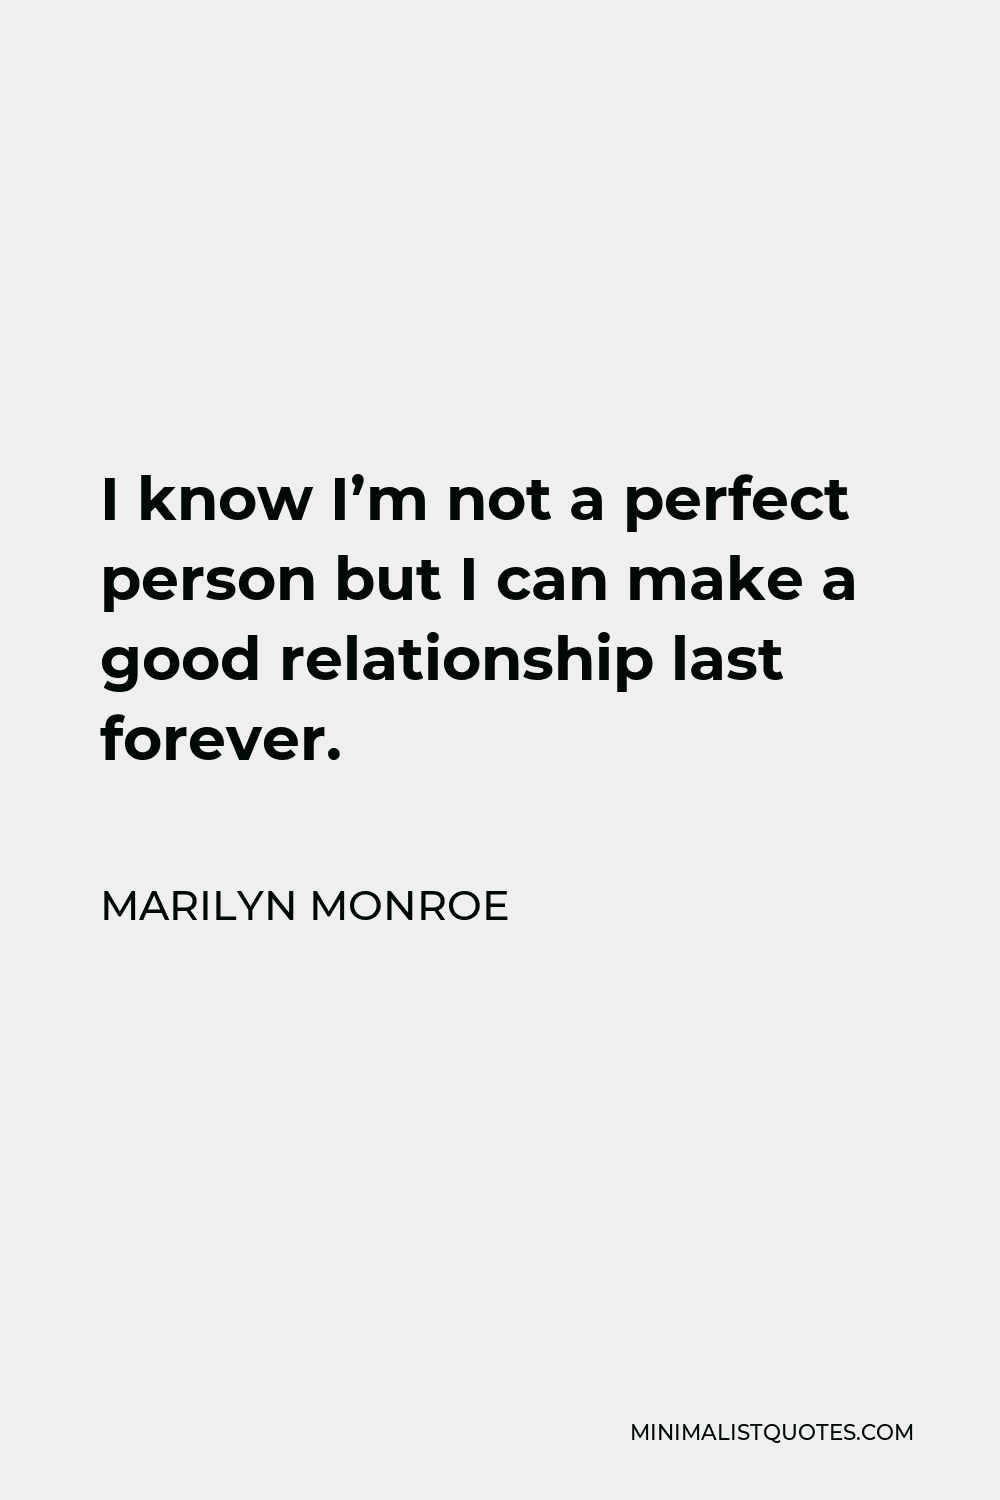 Marilyn Monroe Quote - I know I’m not a perfect person but I can make a good relationship last forever.